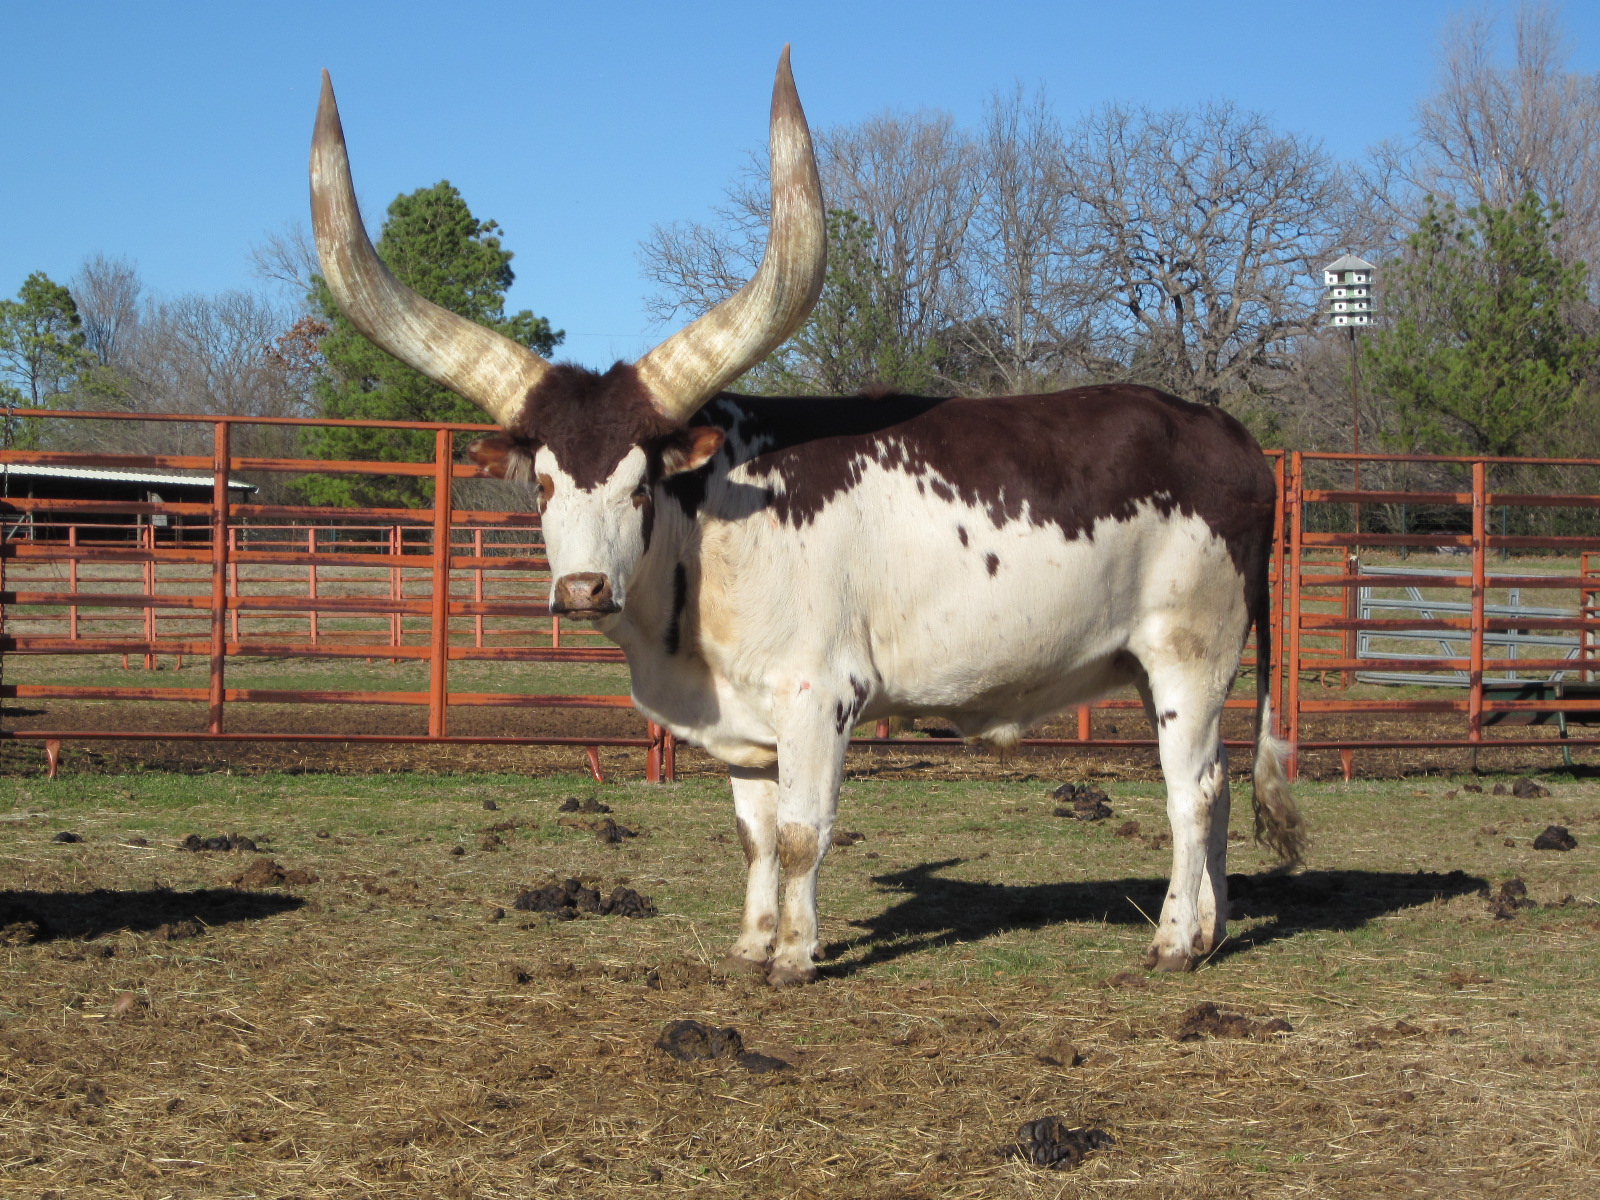 A steer owned by Tom Ward